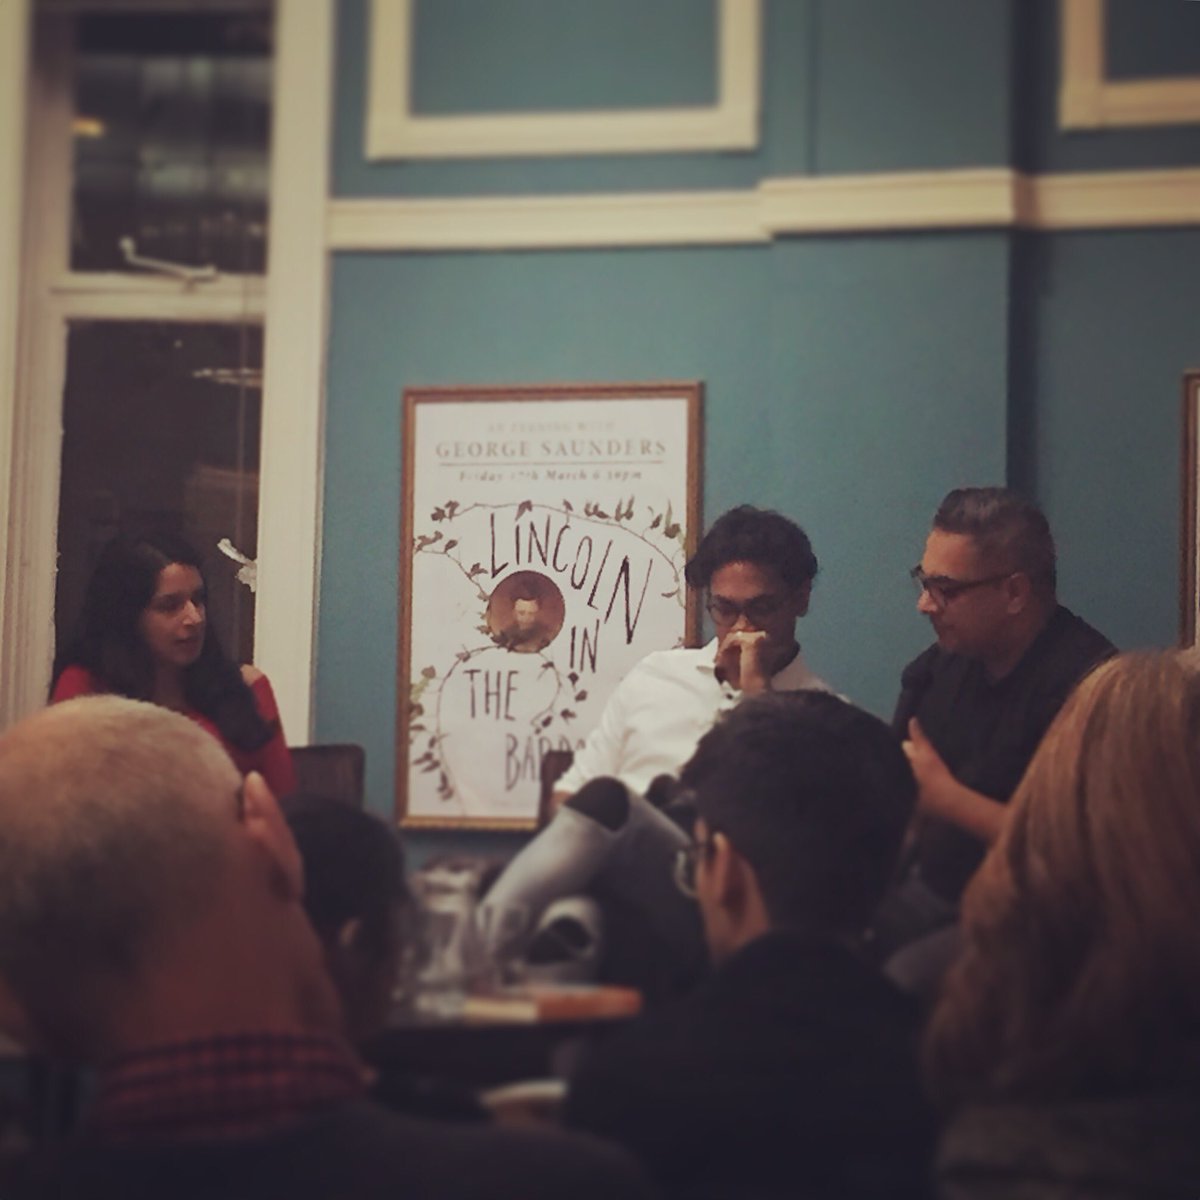 Tonight was about listening to two authors read from their excellent books and talk about writing & language & voices & identity & belonging & family & history & destiny. It was awesome. Thank you @nikeshshukla and Guy Gunaratne. And thanks to #MLF18 and @anitasethi for hosting.